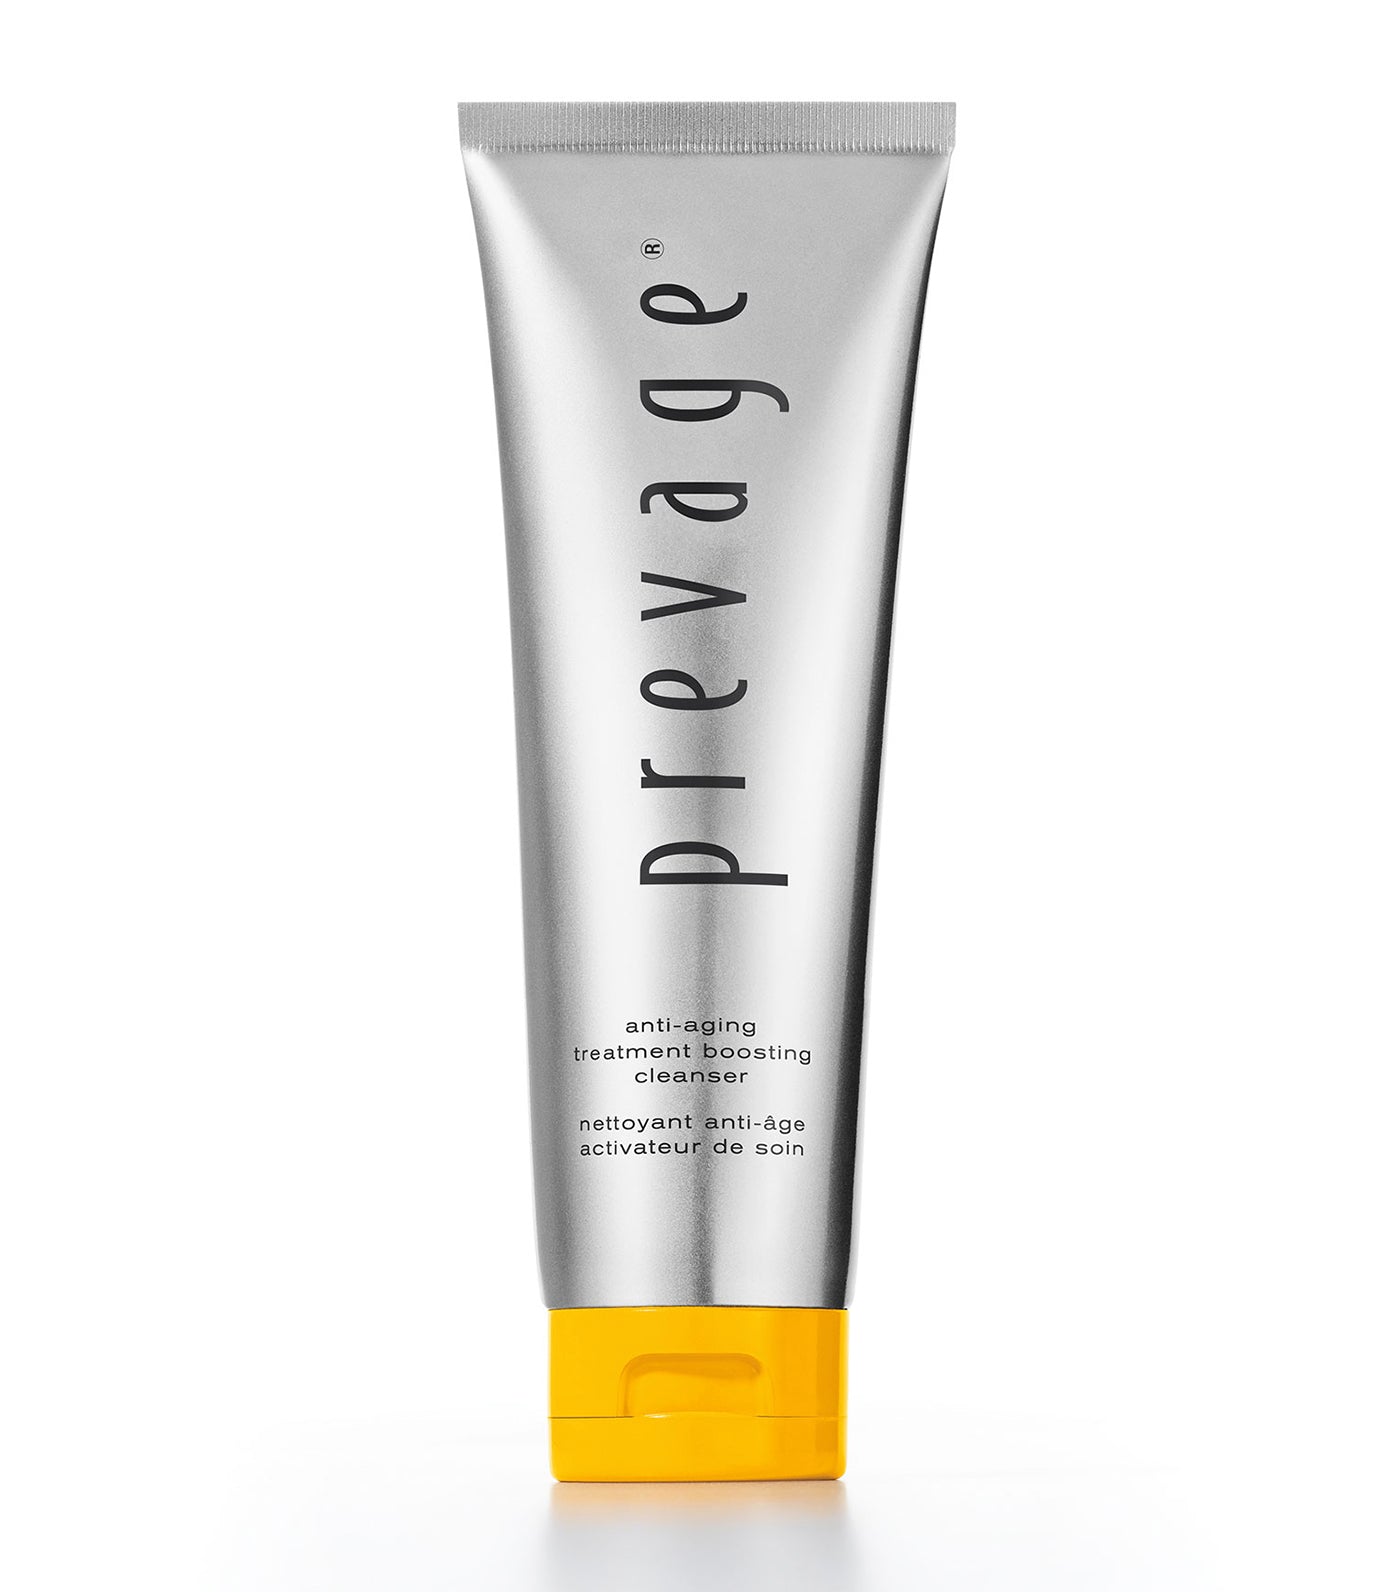 Free PREVAGE® Anti-aging Treatment Boosting Cleanser